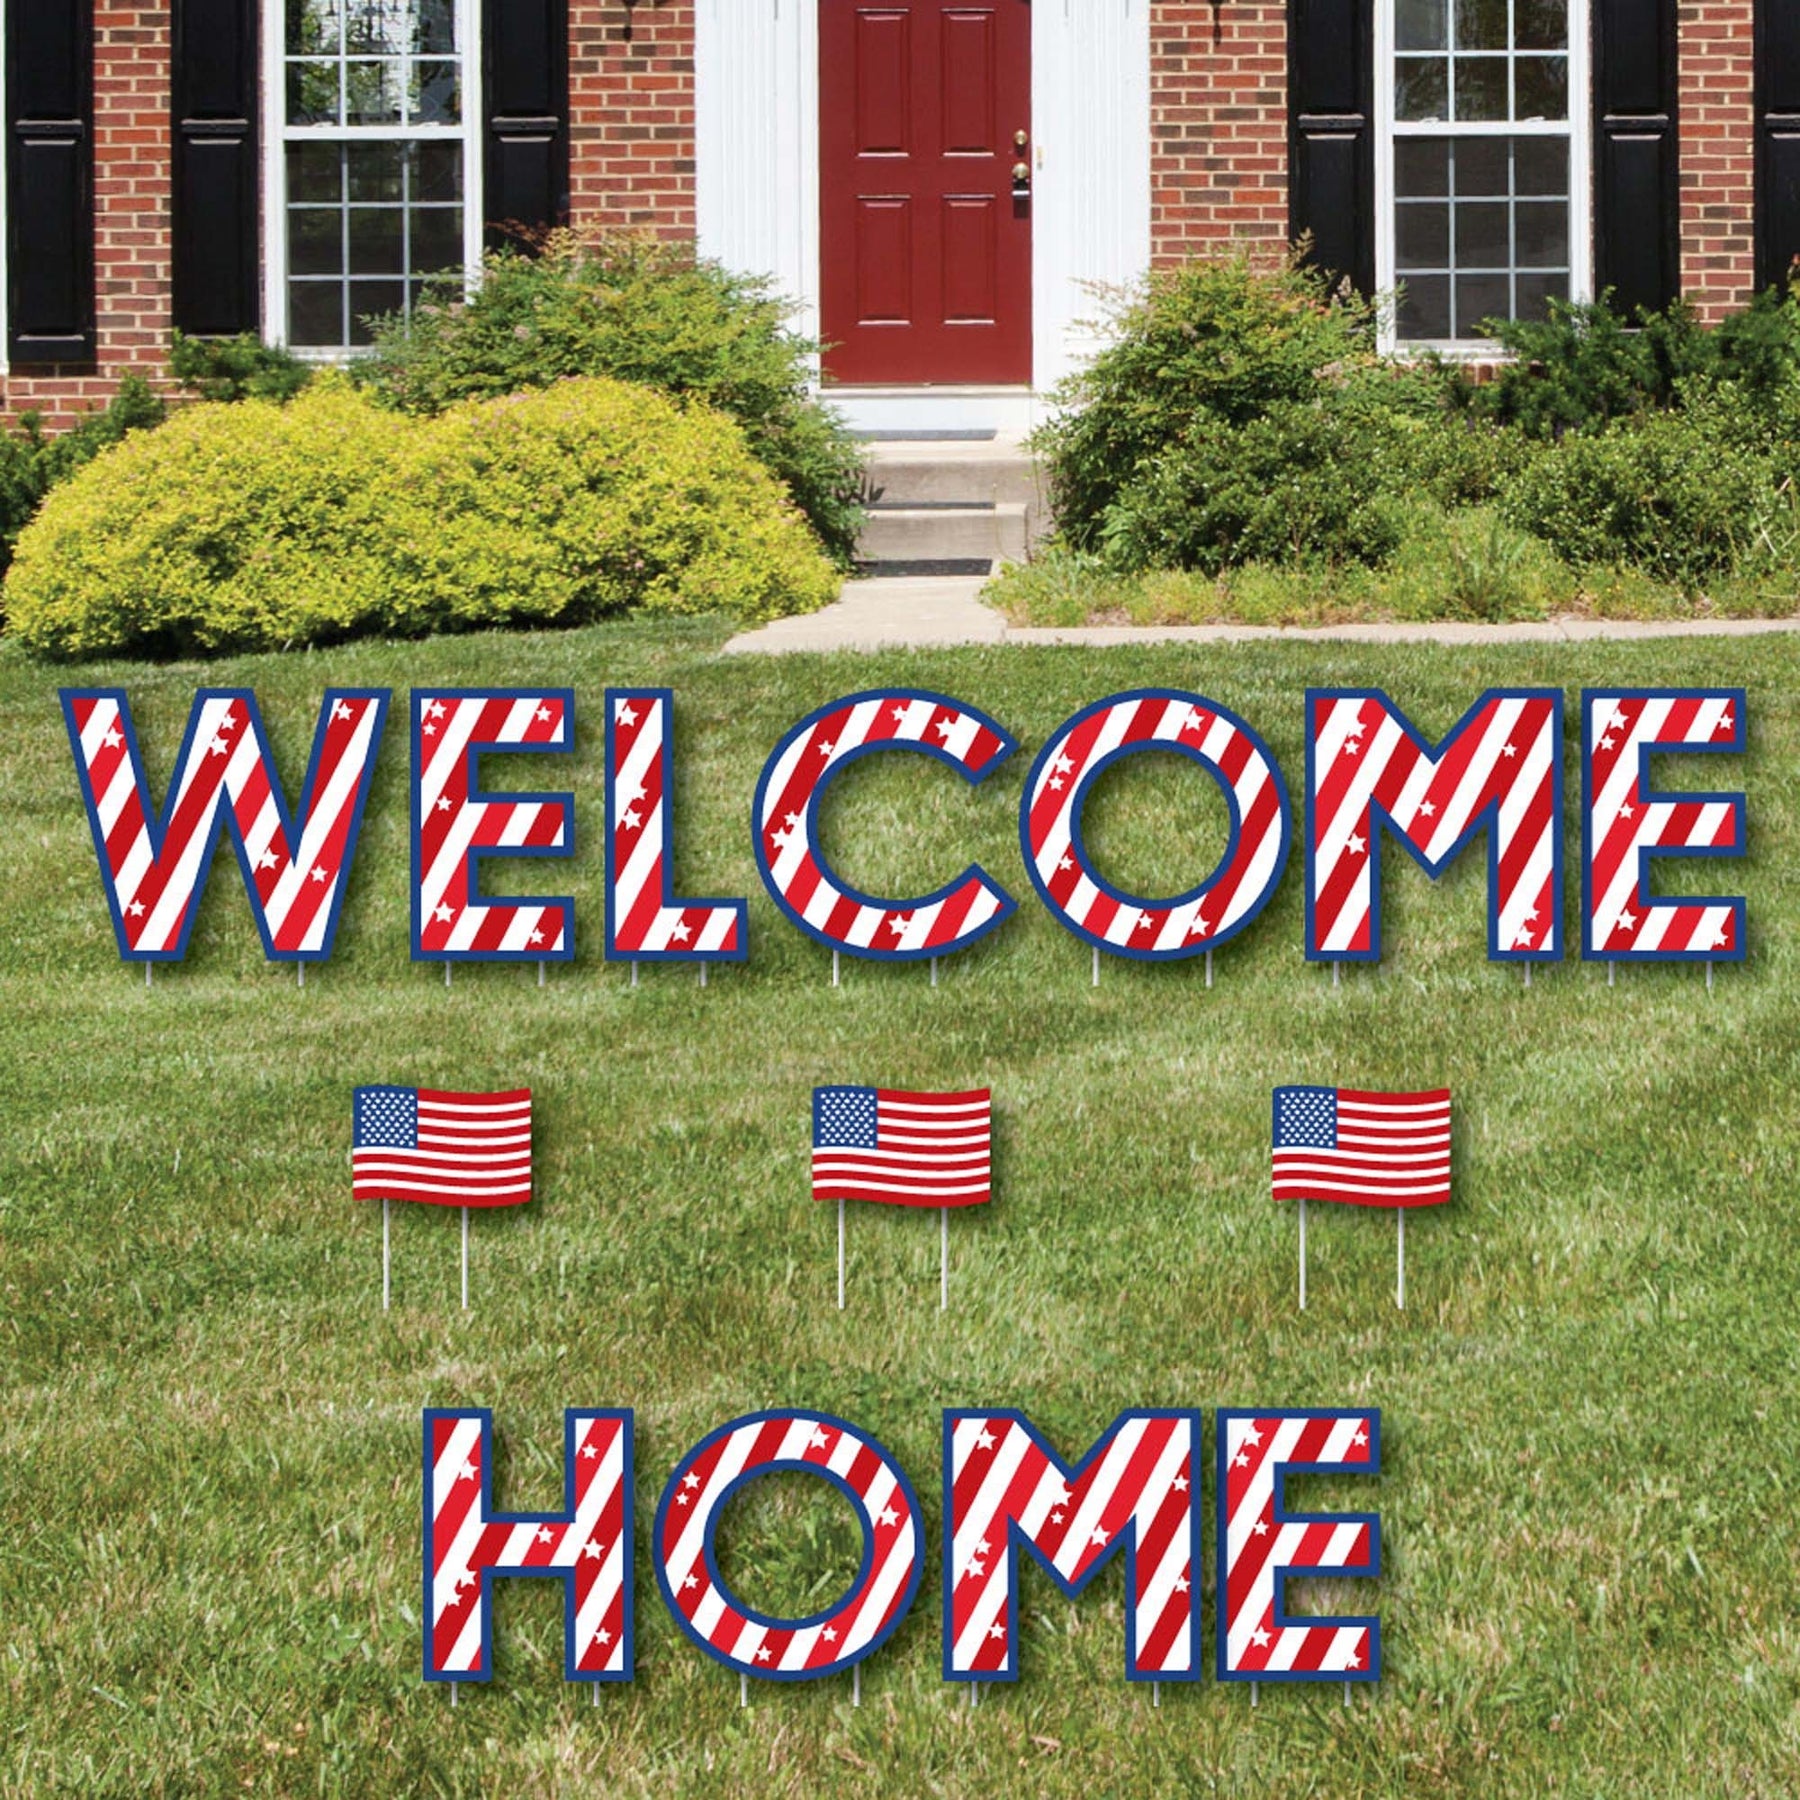 military coming home signs